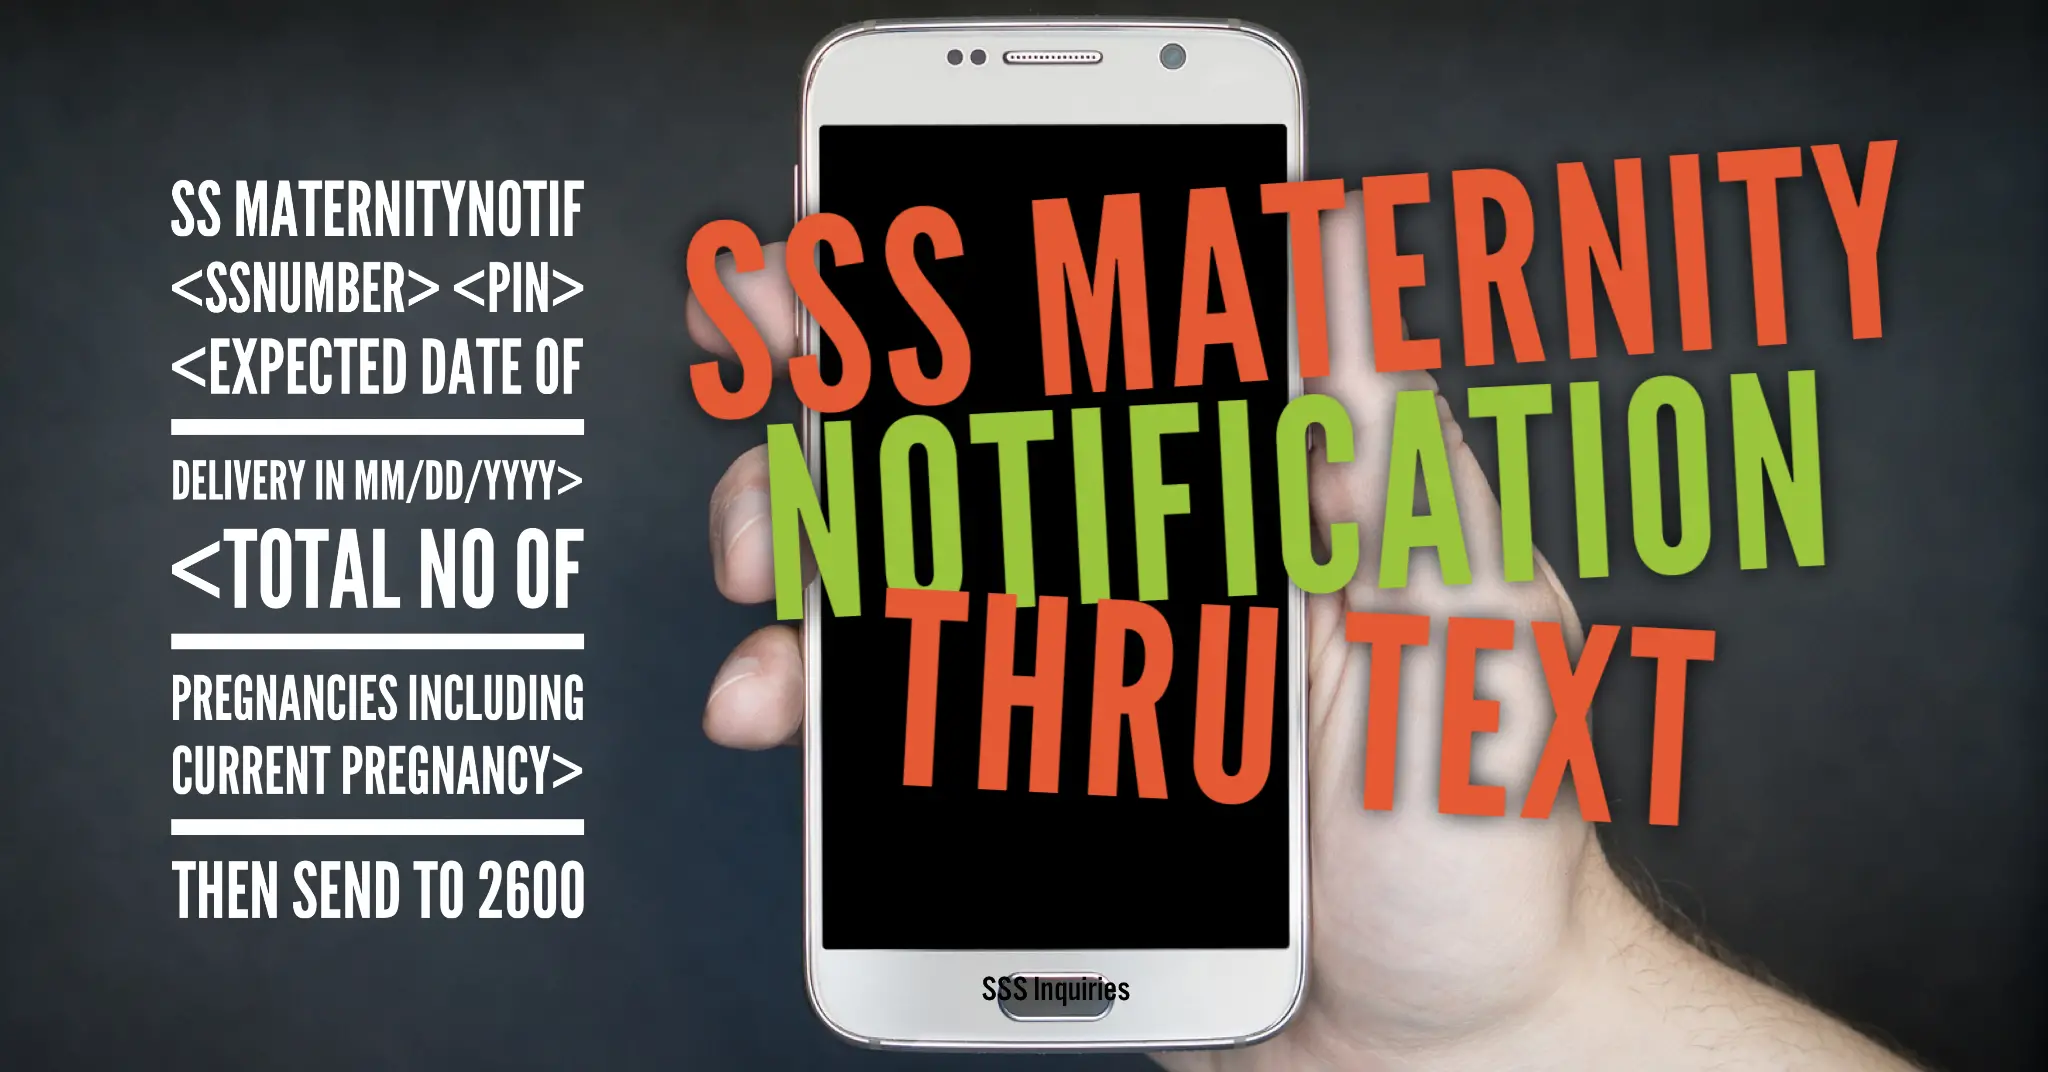 SSS Maternity Notification thru Text - Preview